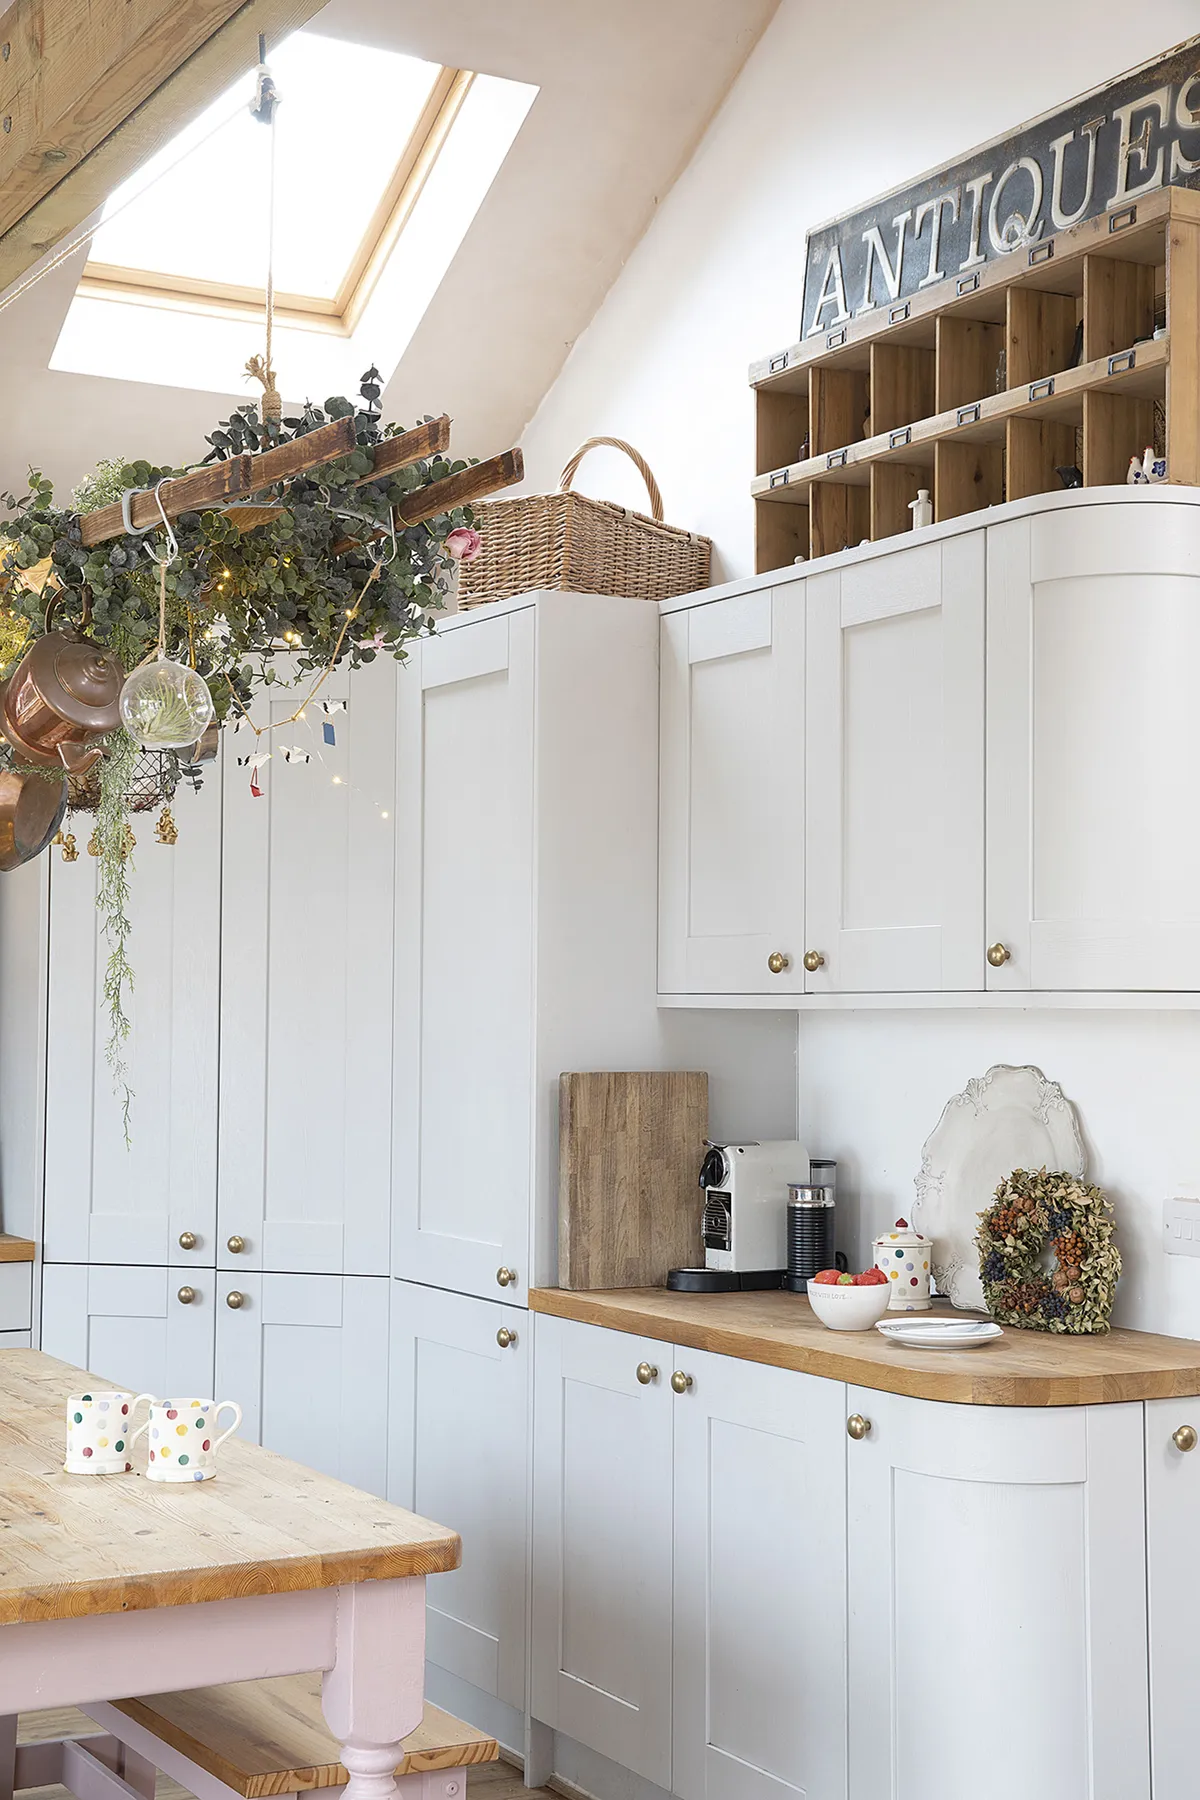 The large corner larder is home to the boiler as well as Sandra’s well-stocked pantry. ‘It lights up when